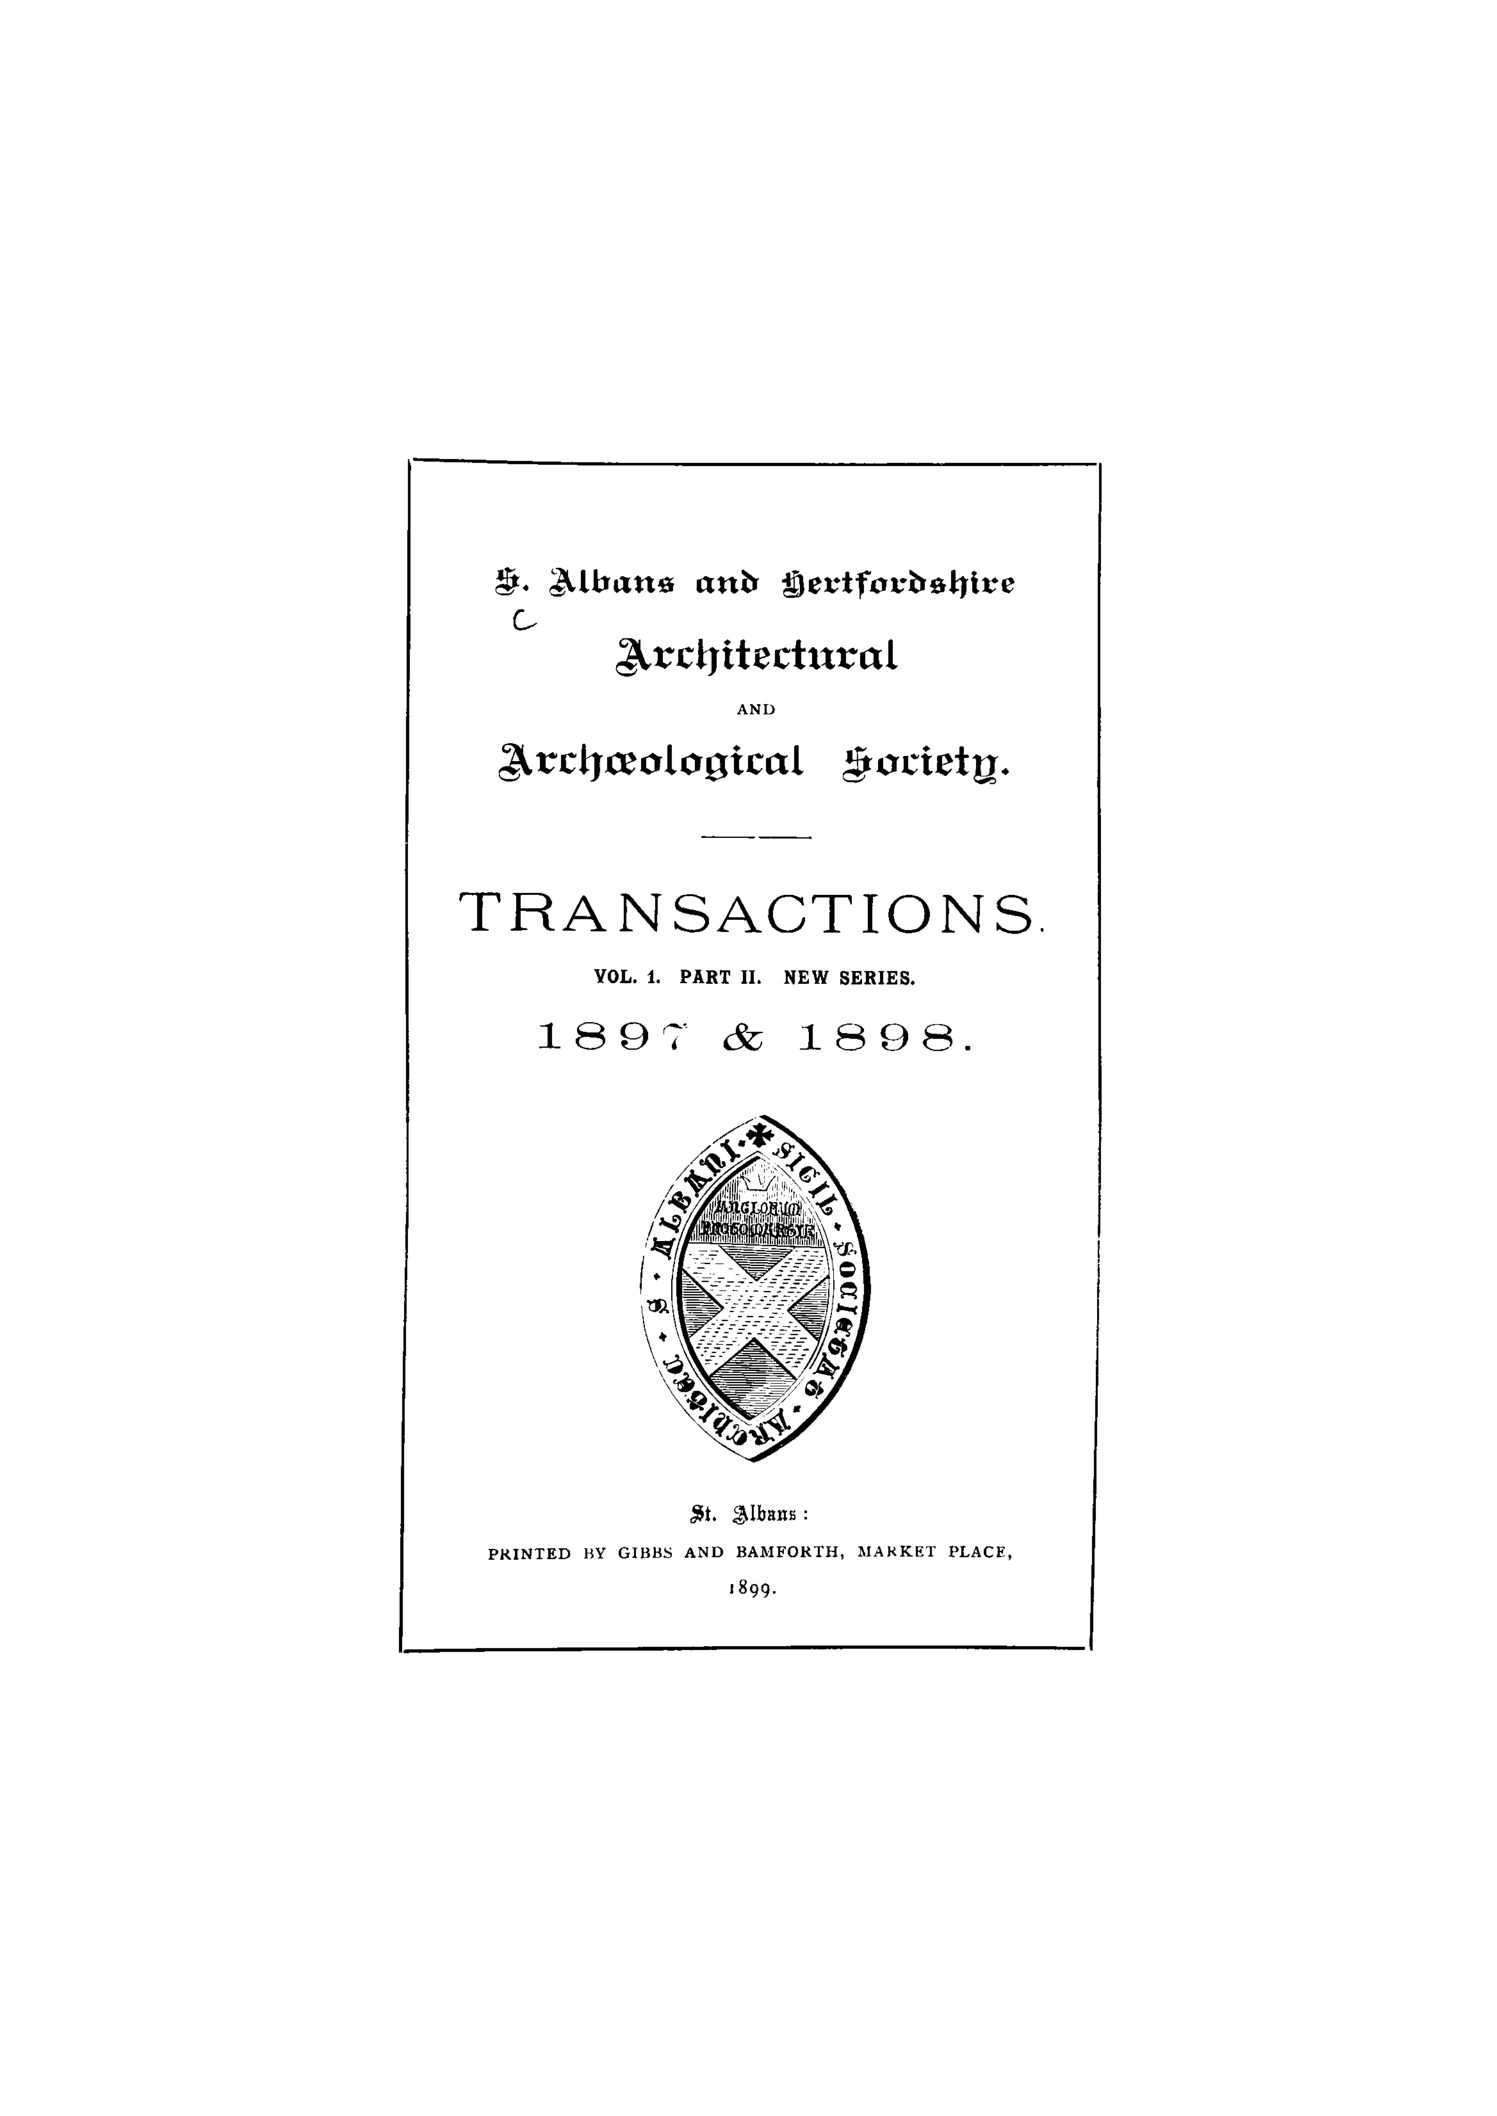 Transactions of the Society (1897-98)